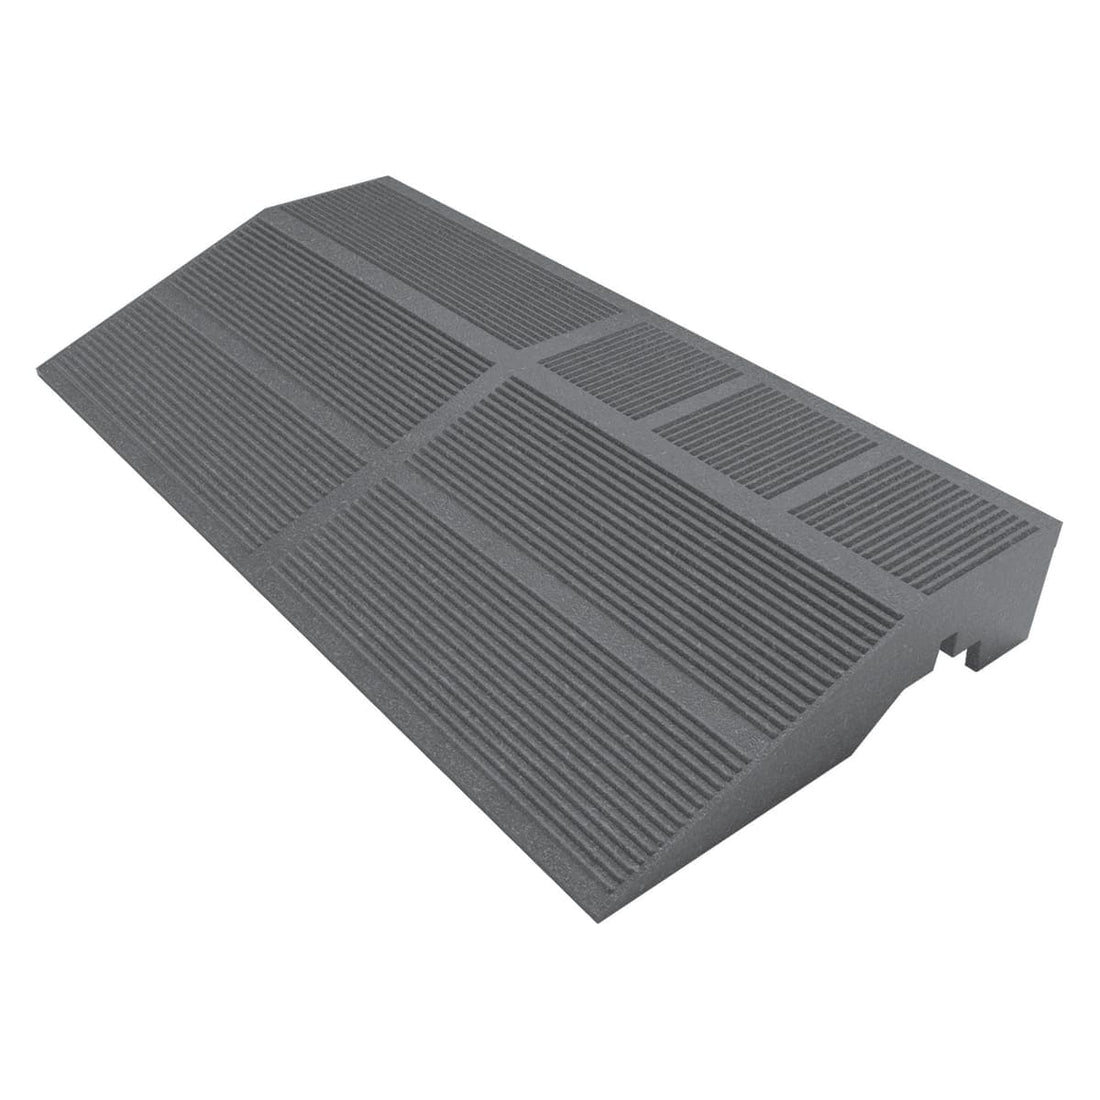 GREY CHUTE WITH TONGUE AND GROOVE CONNECTION FOR LEPLA COMPOSITE WOOD TILE